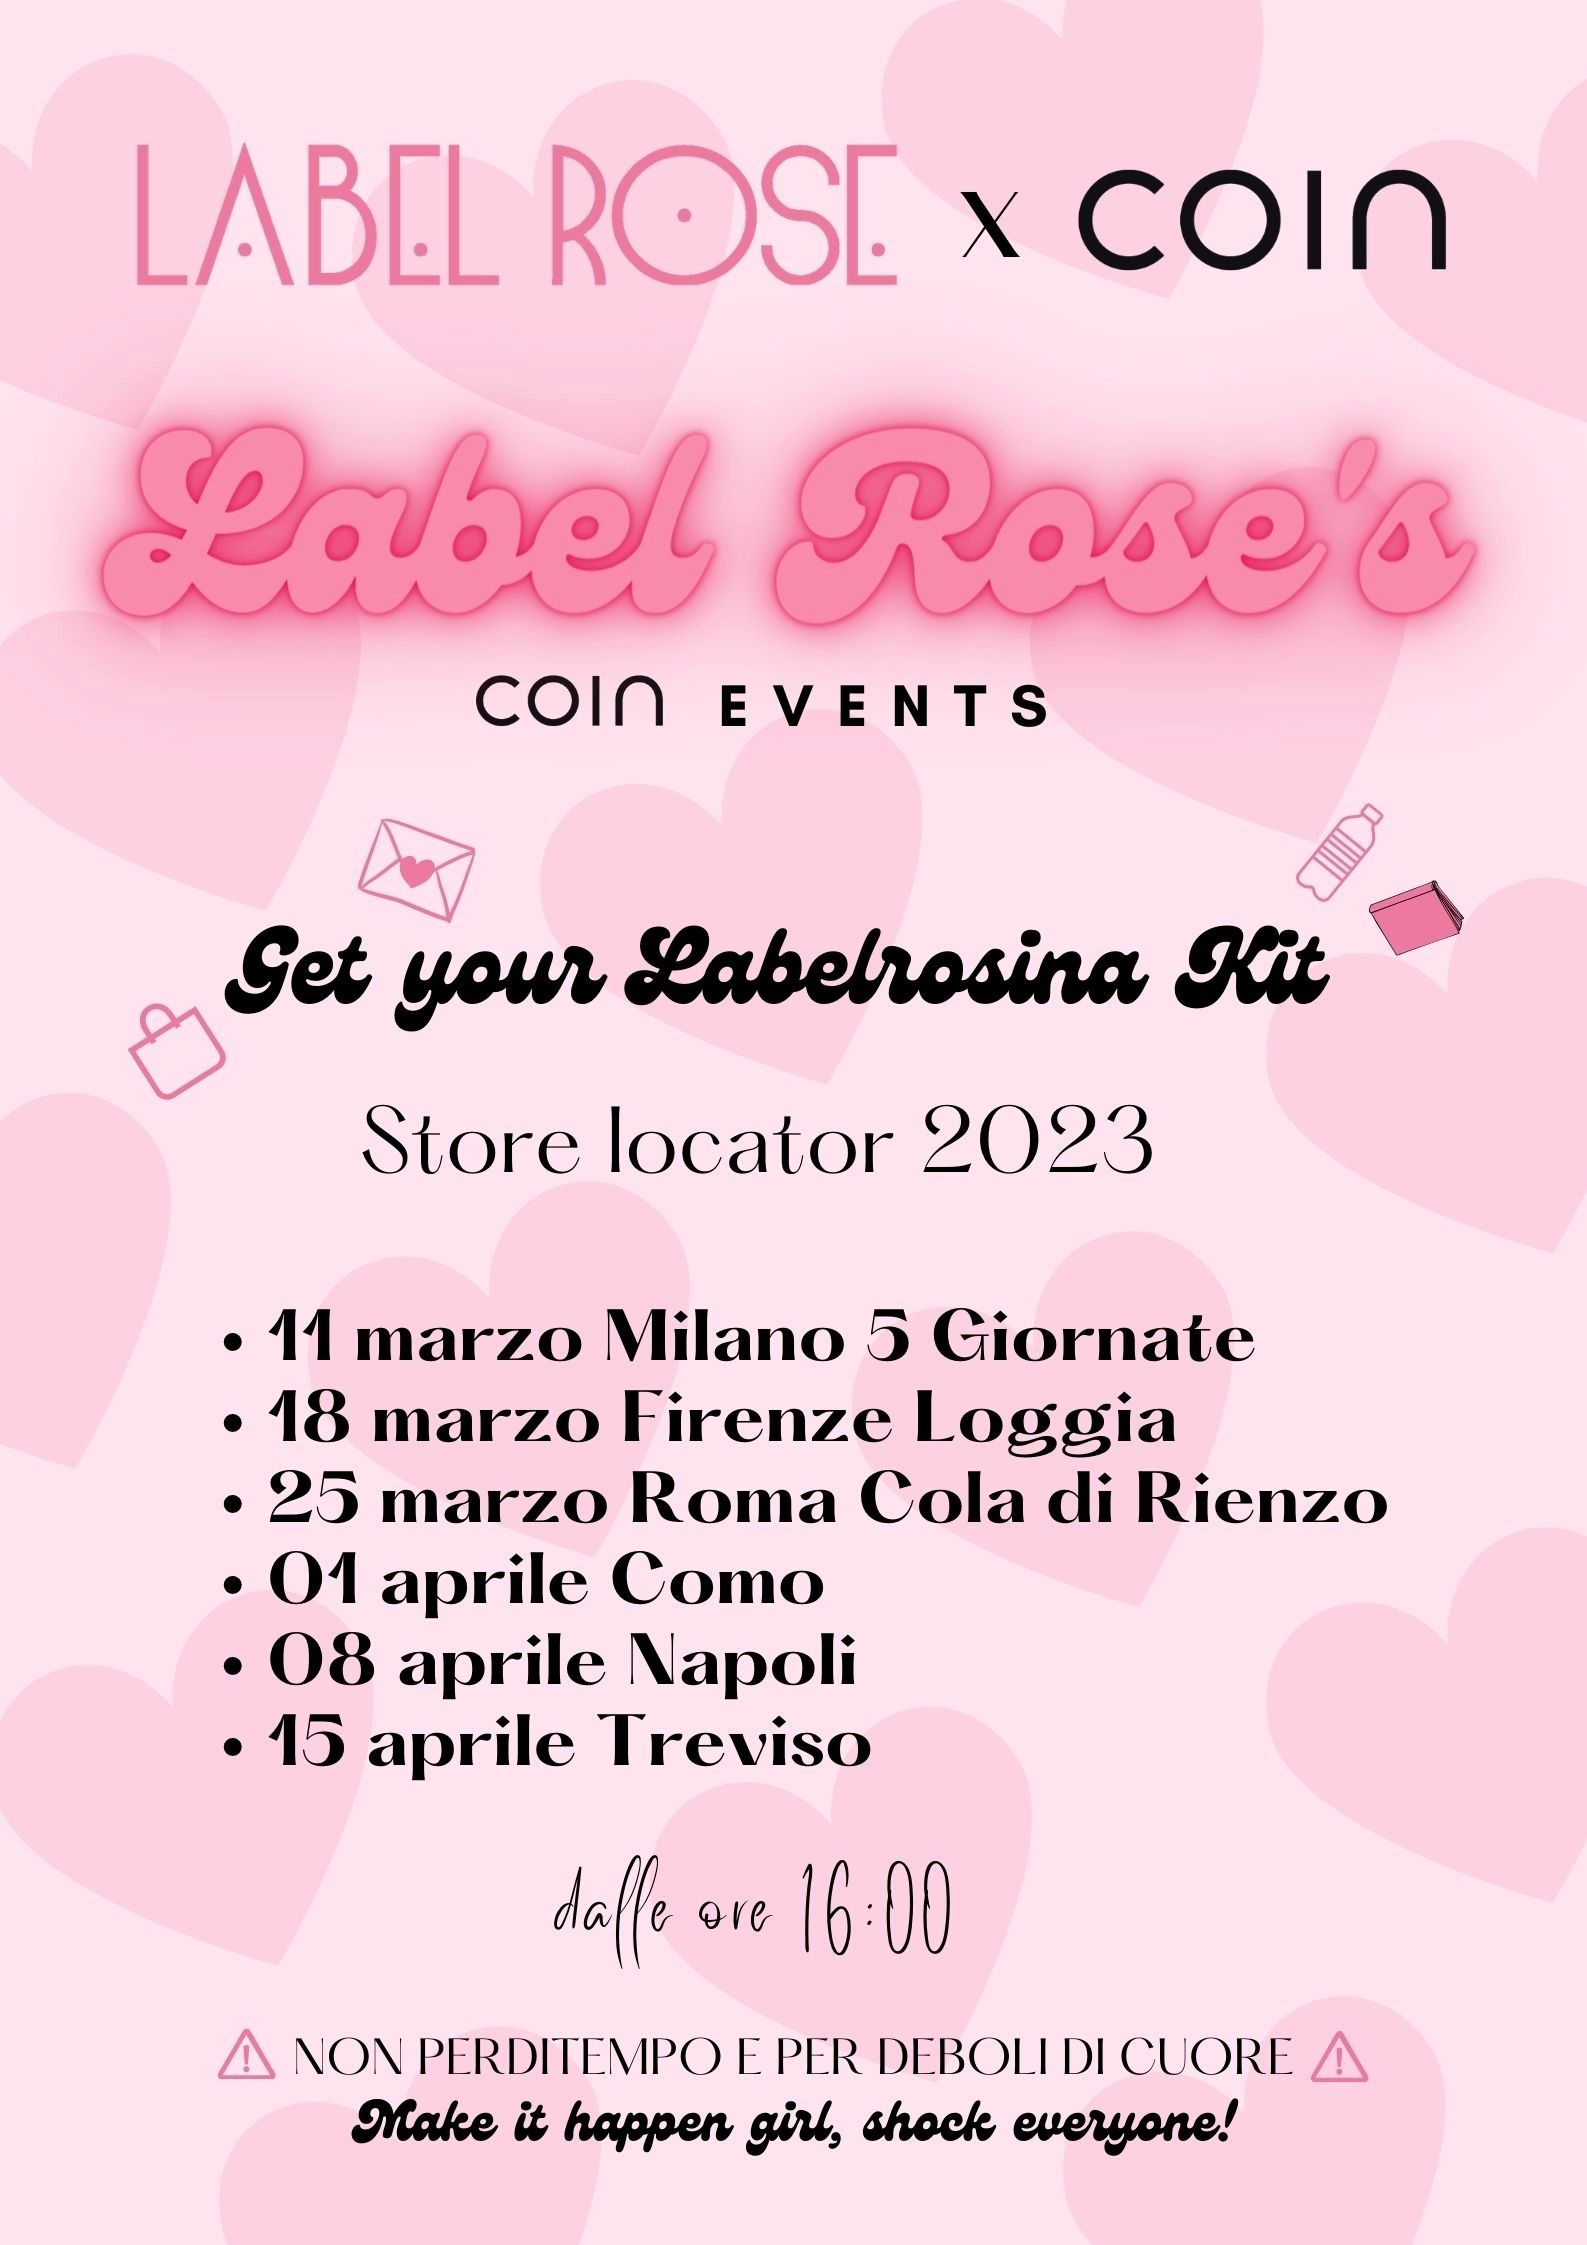 Label Rose in Coin